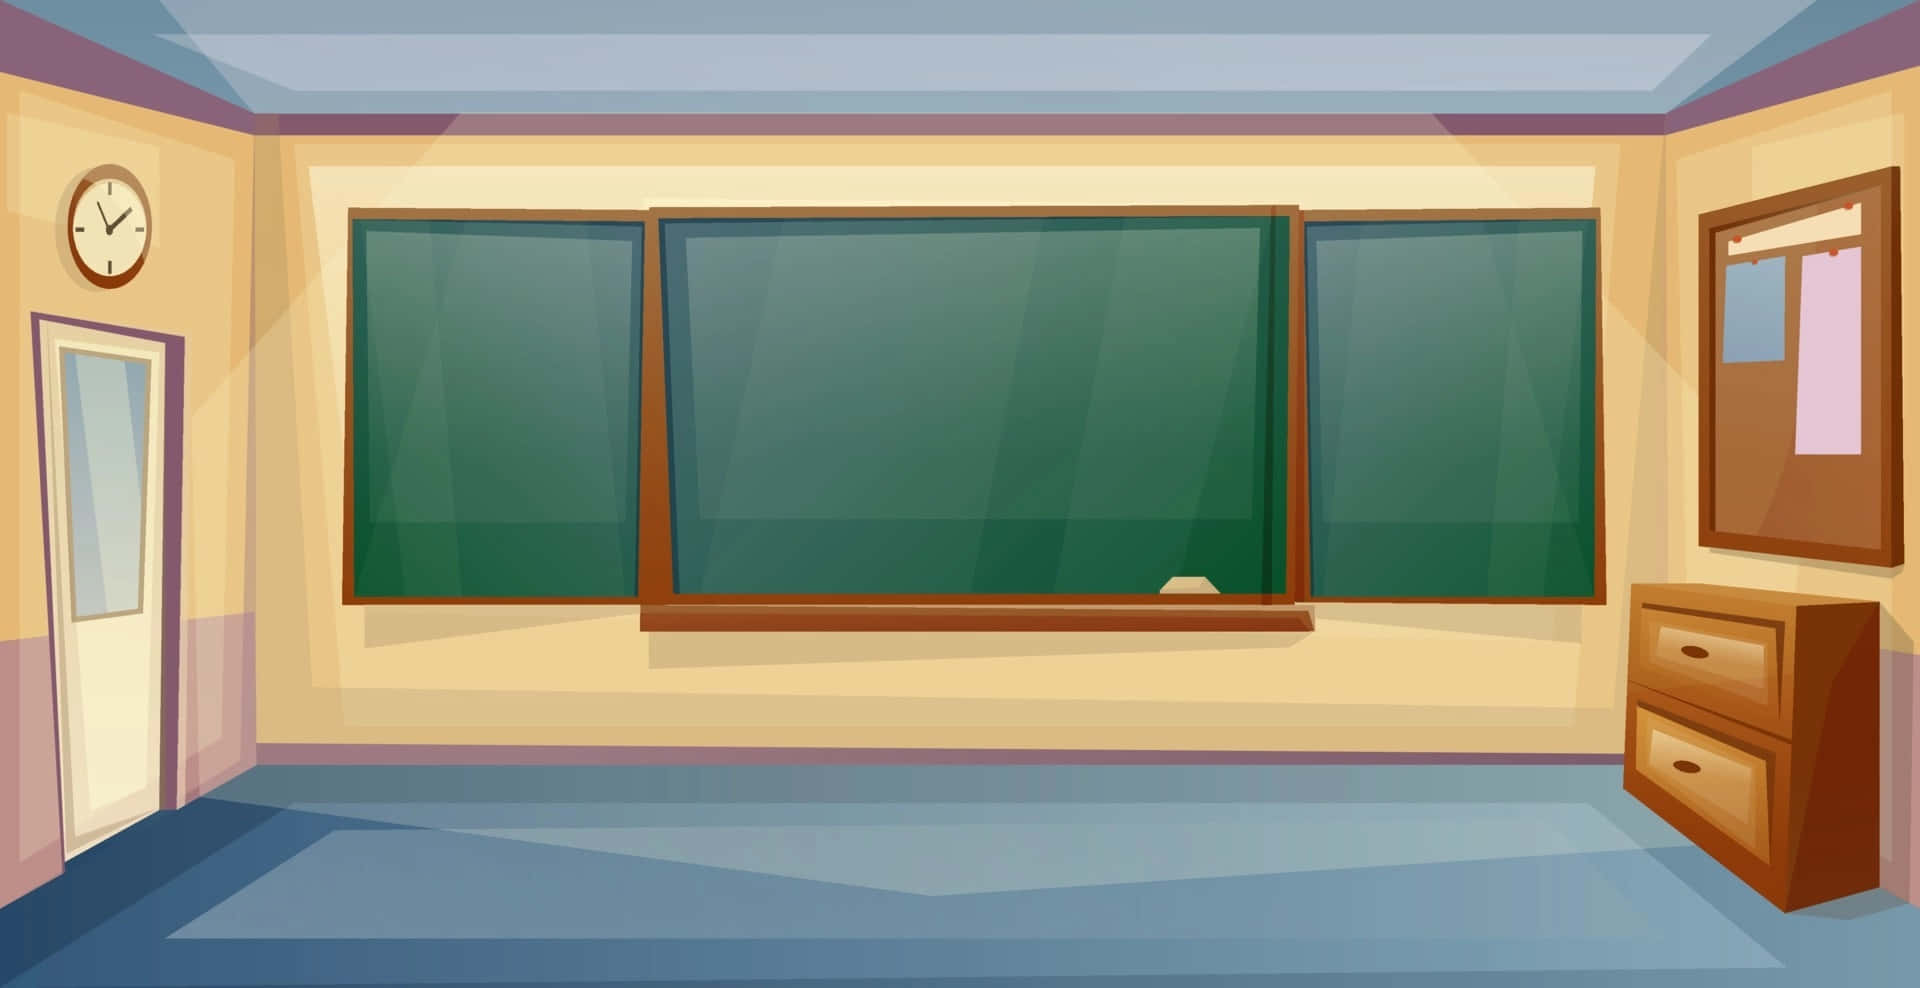 Classroom With Clean Chalkboards Background